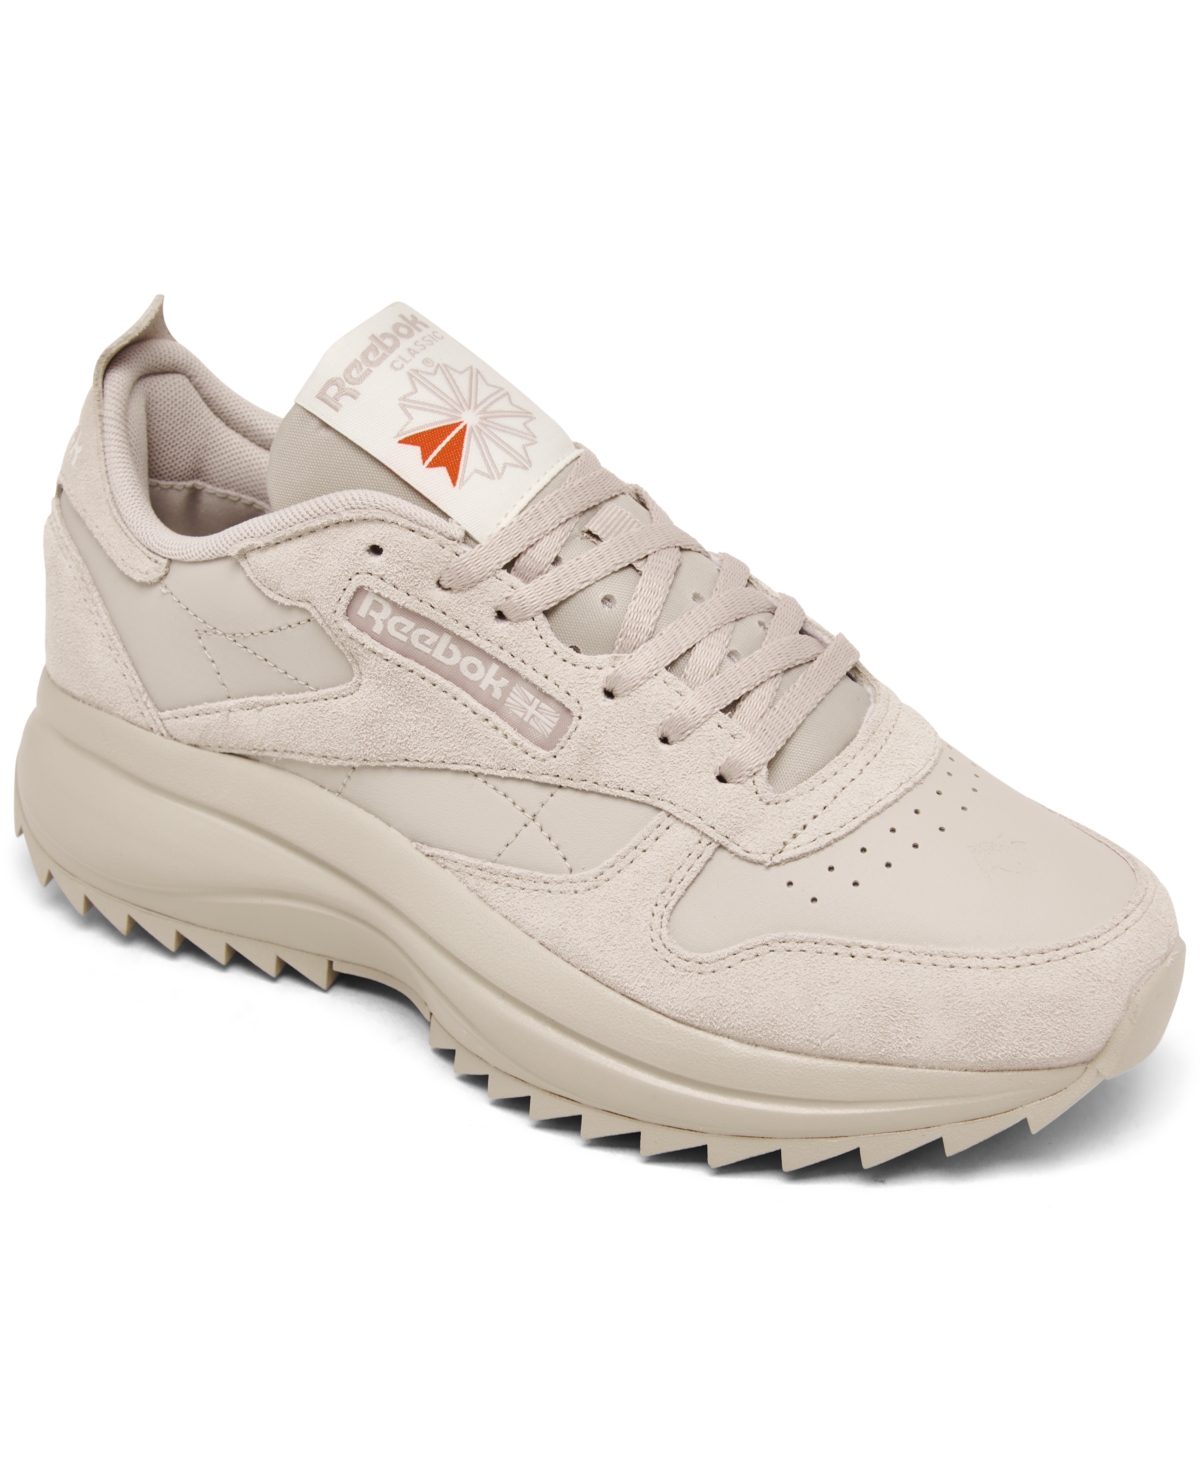 Reebok Women's Classic Leather Sp Casual Sneakers From Finish Line In Moonstone,moonstone